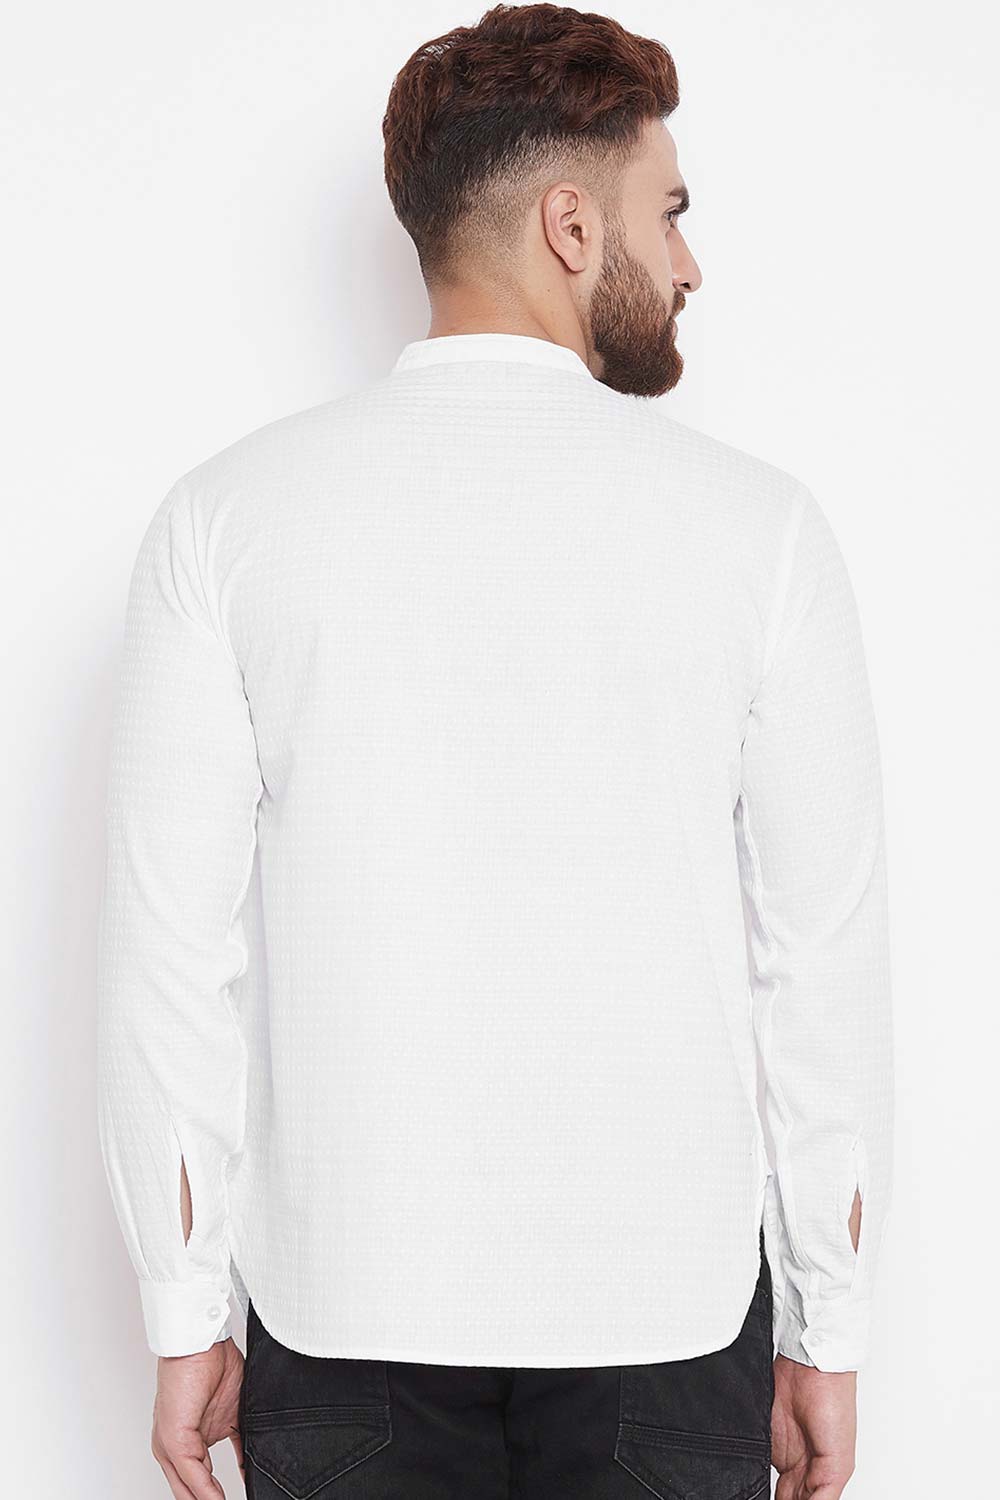 Buy Blended Cotton Solid Kurta in White Online - Zoom In